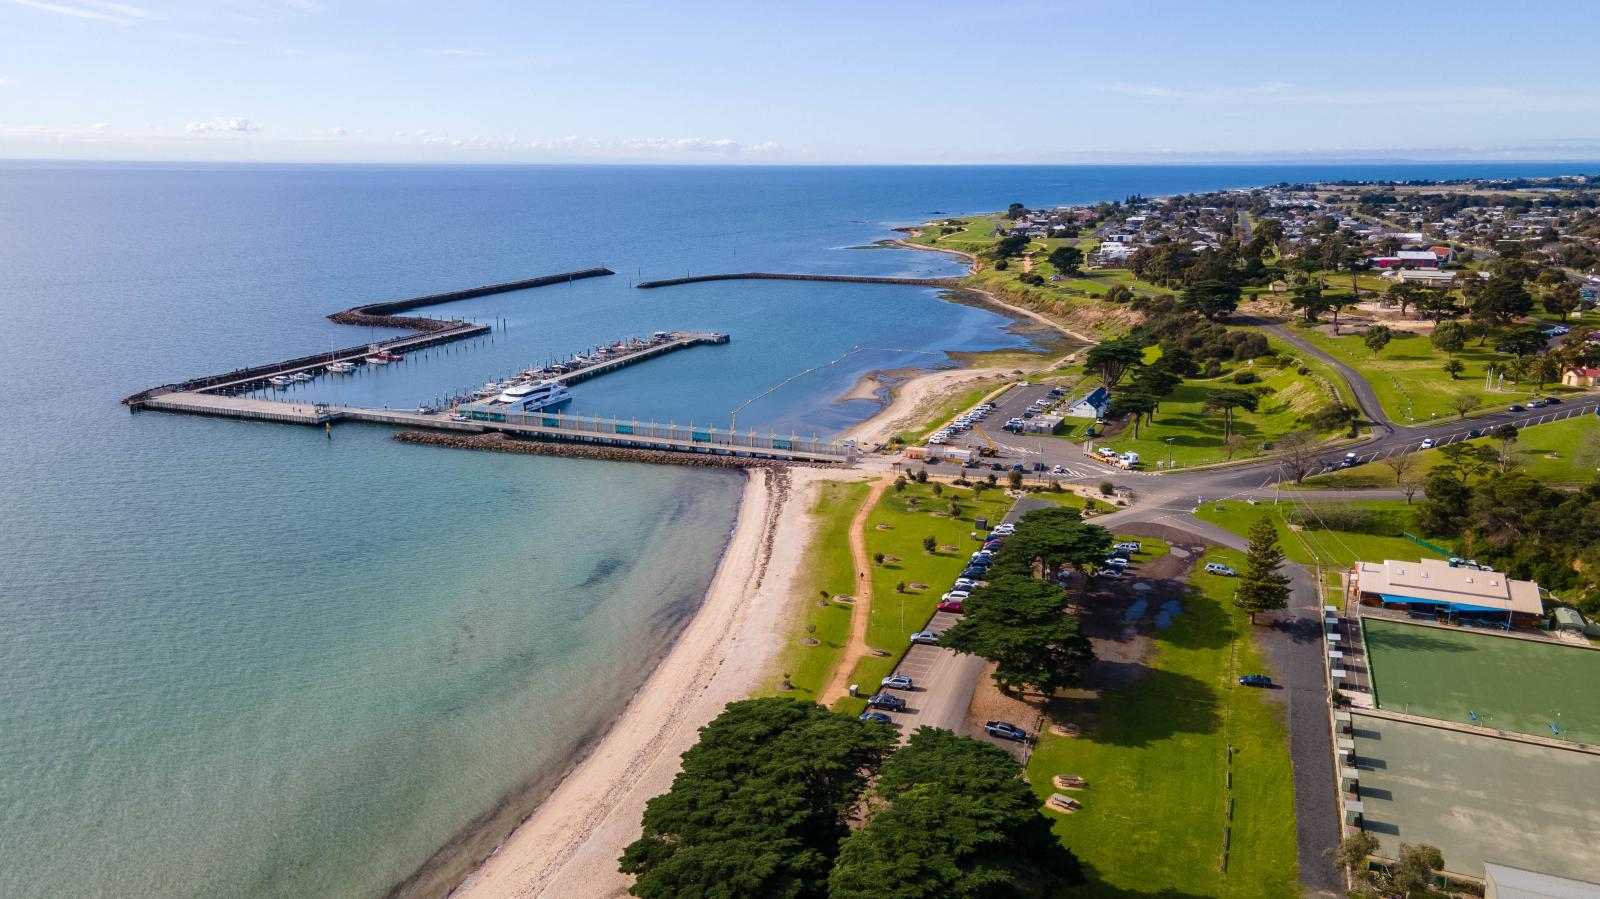 View Photo: Gutter Cleaners Drone gets an outlook over Port Arlington